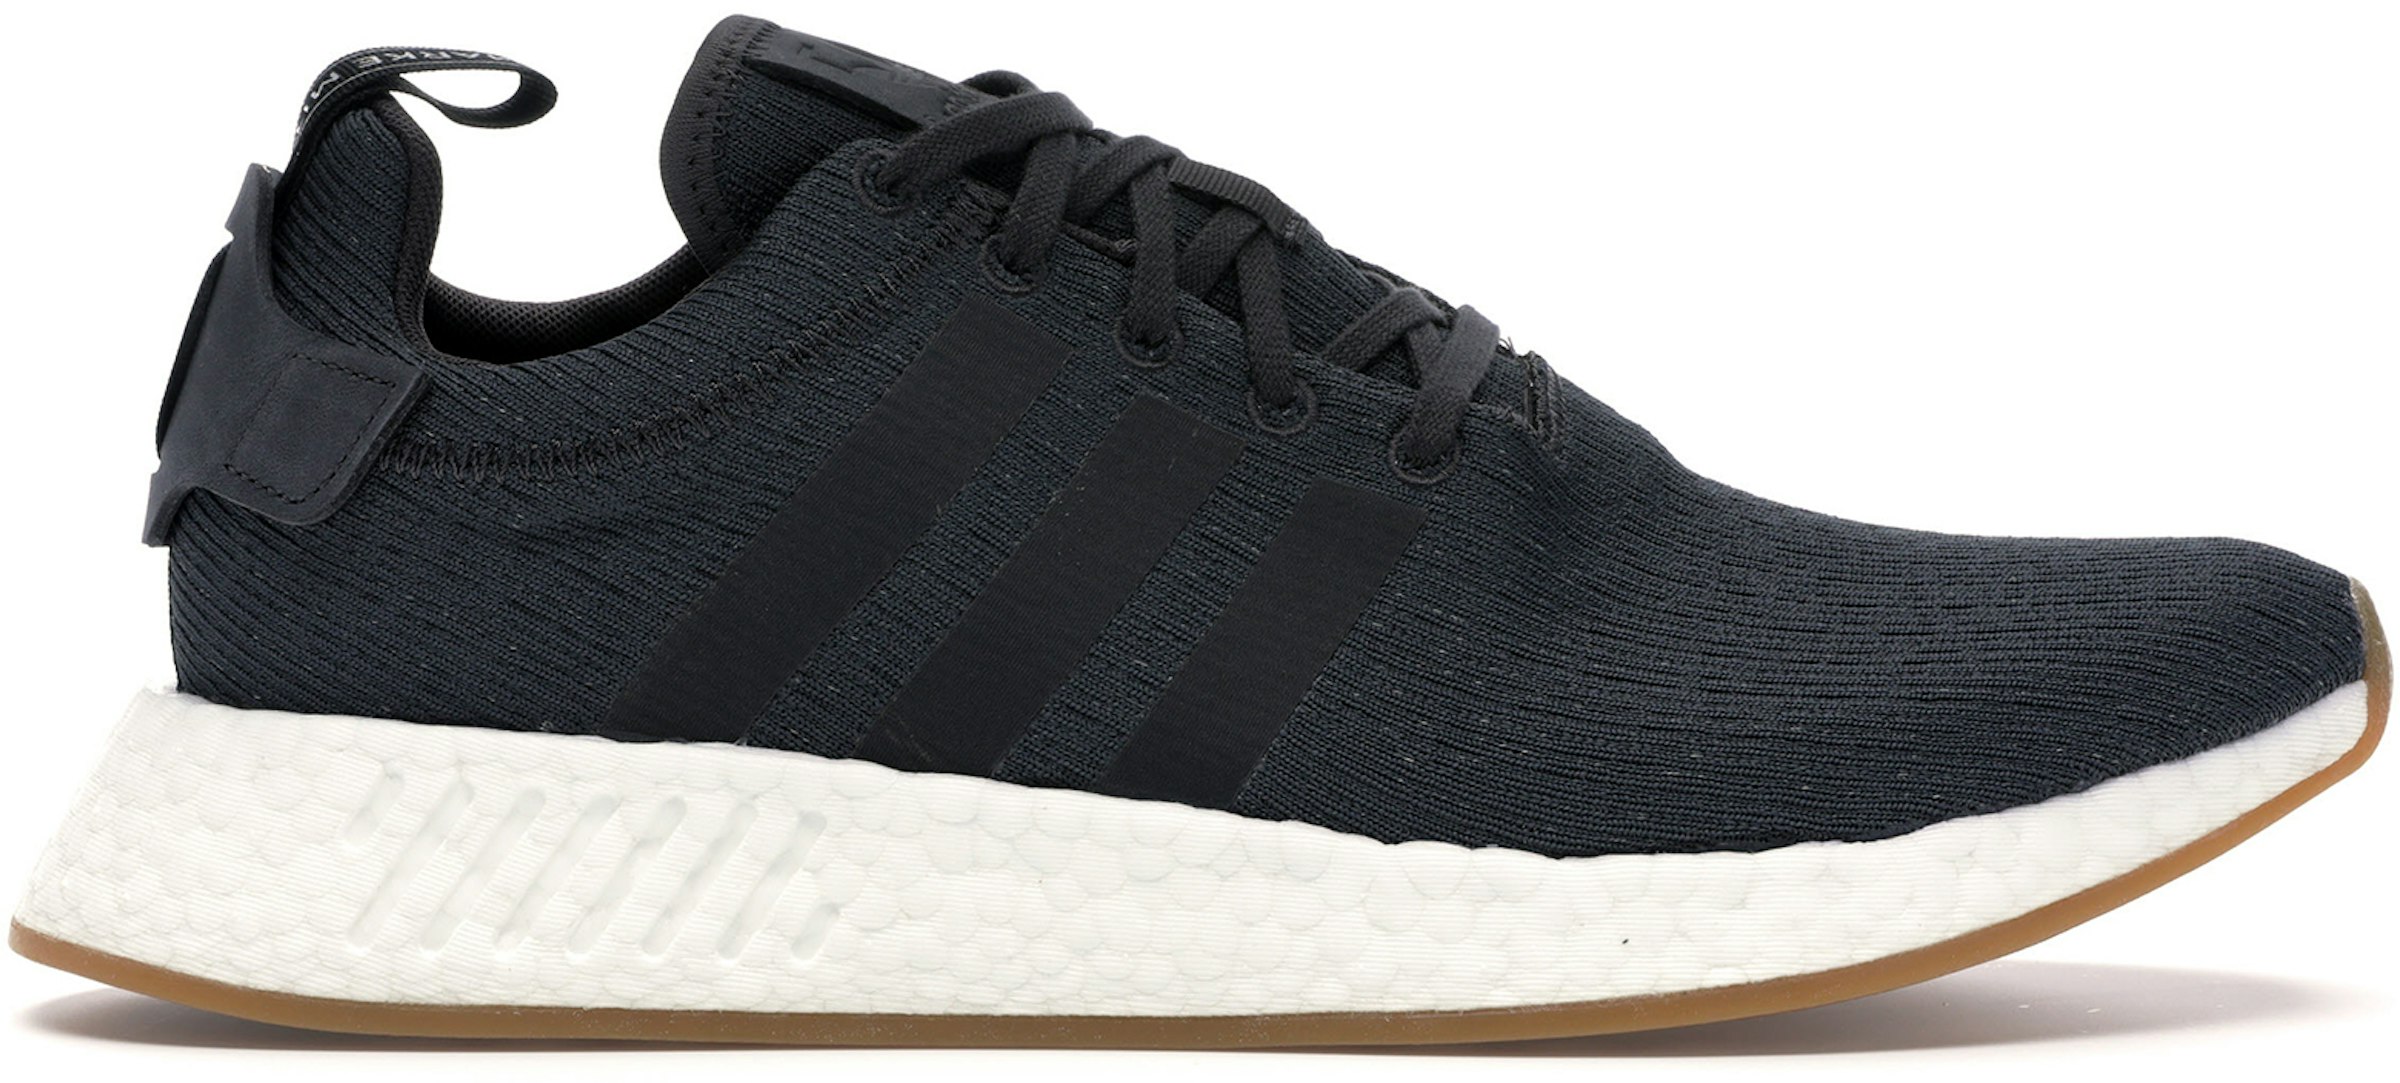 adidas NMD R2 Shoes & New Sneakers - StockX